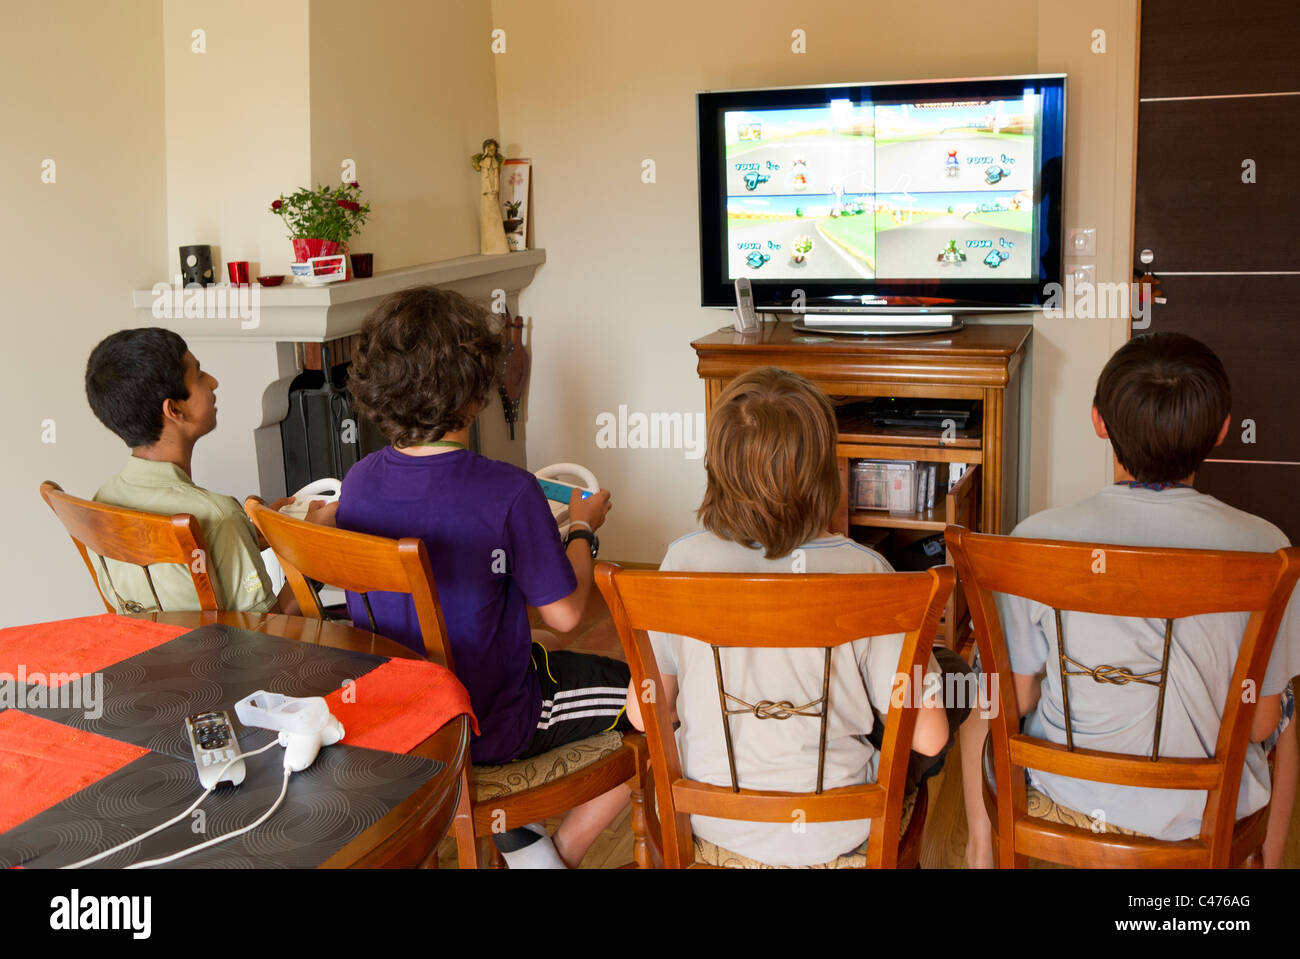 4 young teenages play Wii Nintendo console games Stock Photo